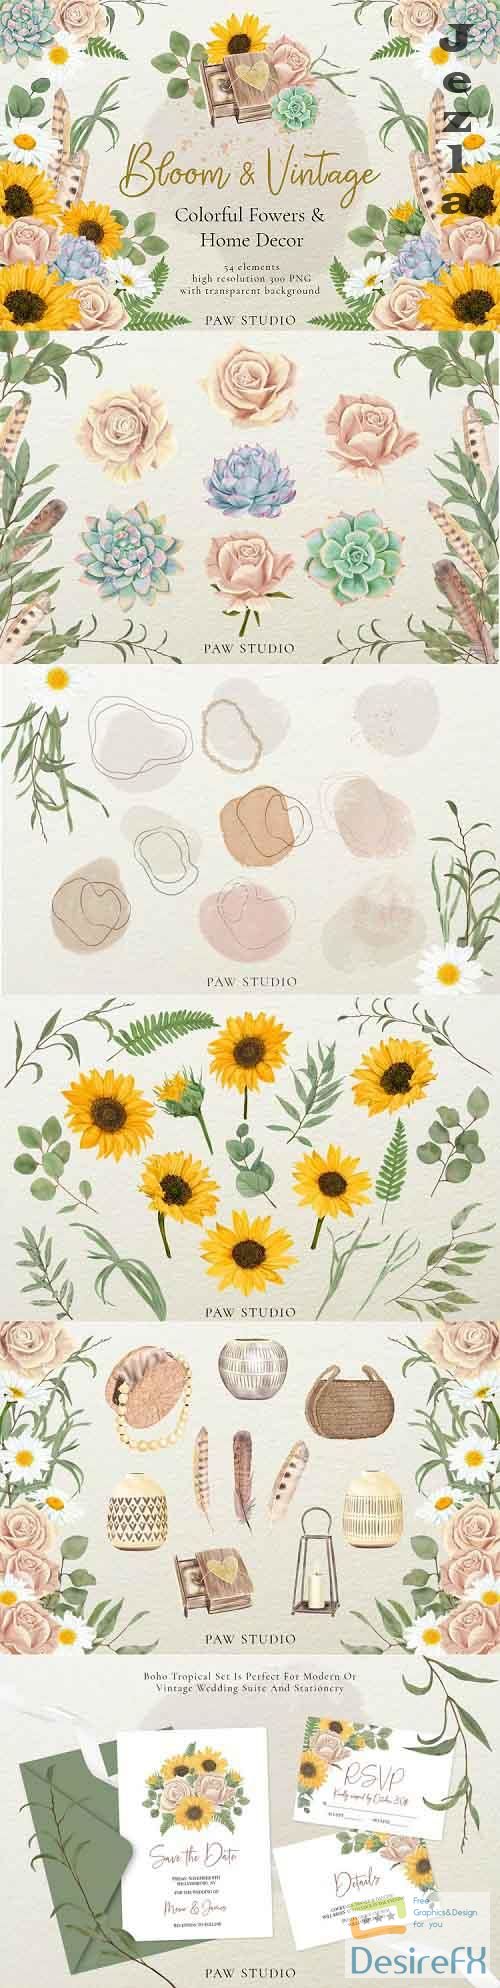 Bloom &amp; Vintage Graphic. Flowers, Leaves, Home Decor - 593186